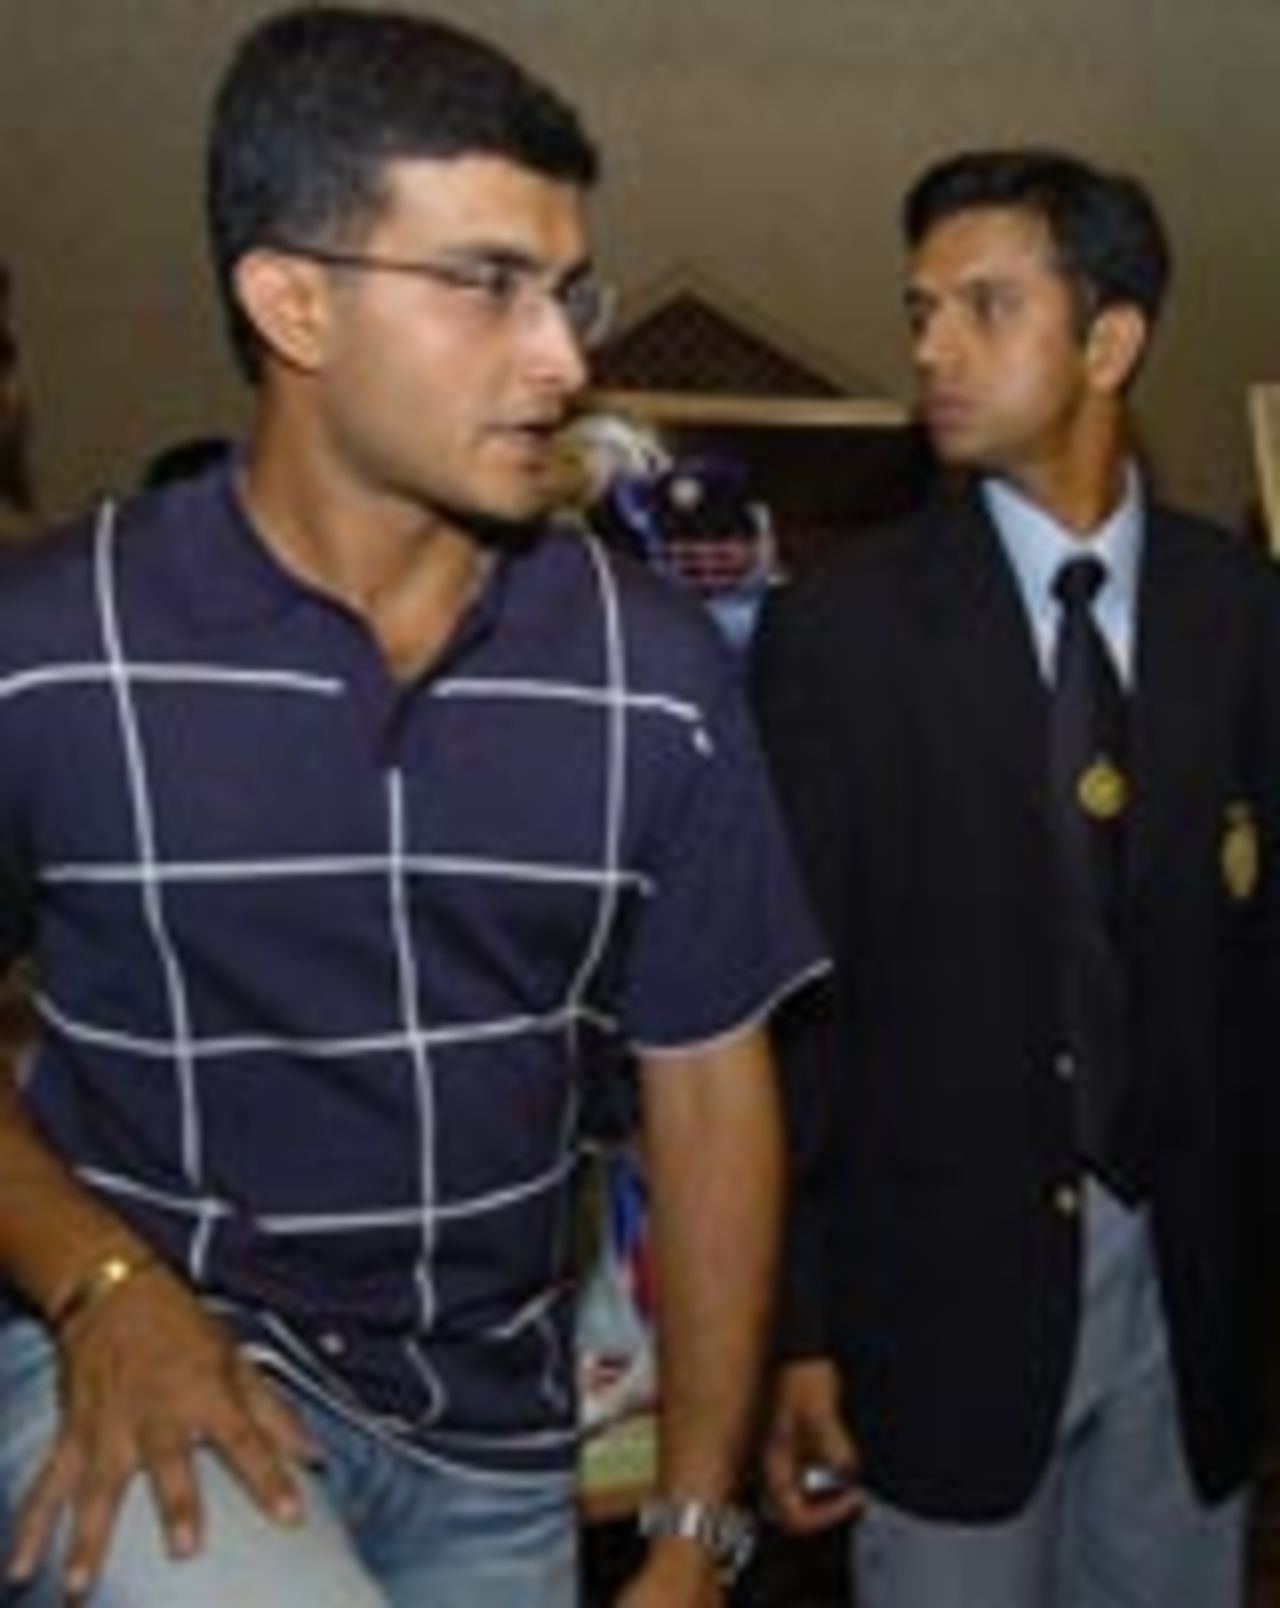 Sourav Ganguly and Rahul Dravid at a reception before the team's departure to Pakistan, March 10, 2004